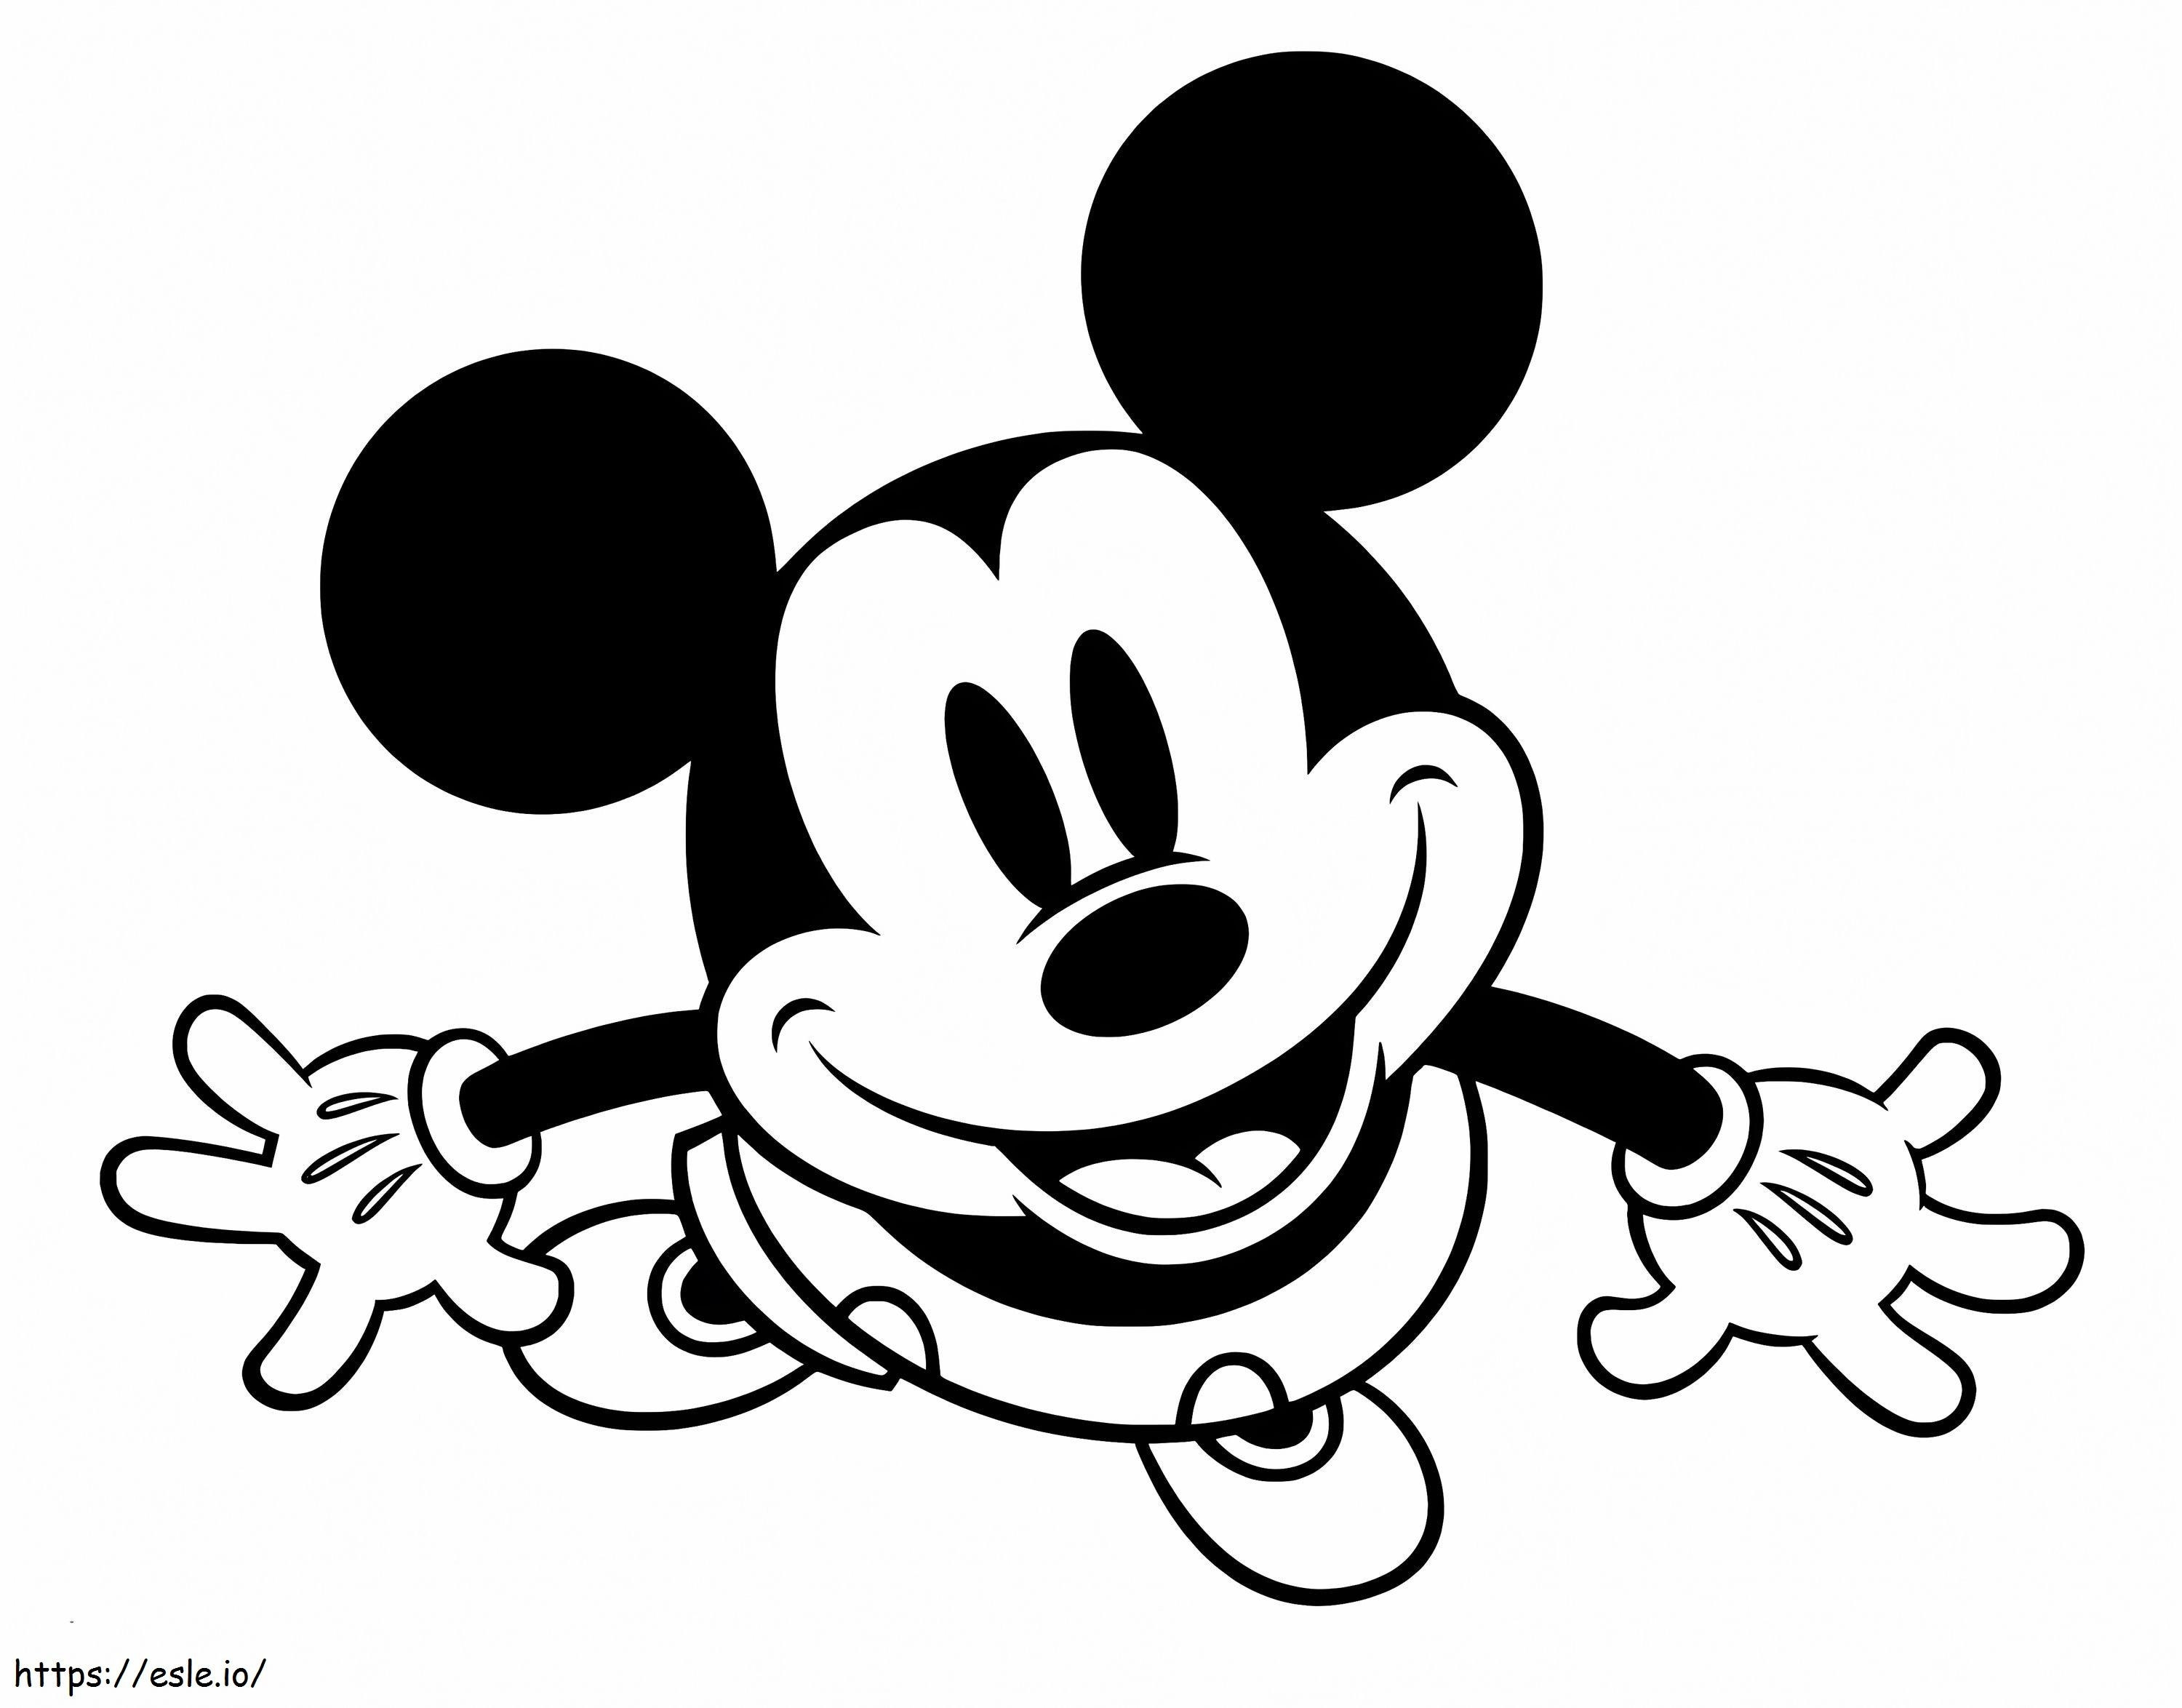 Fun Mickey Mouse coloring page